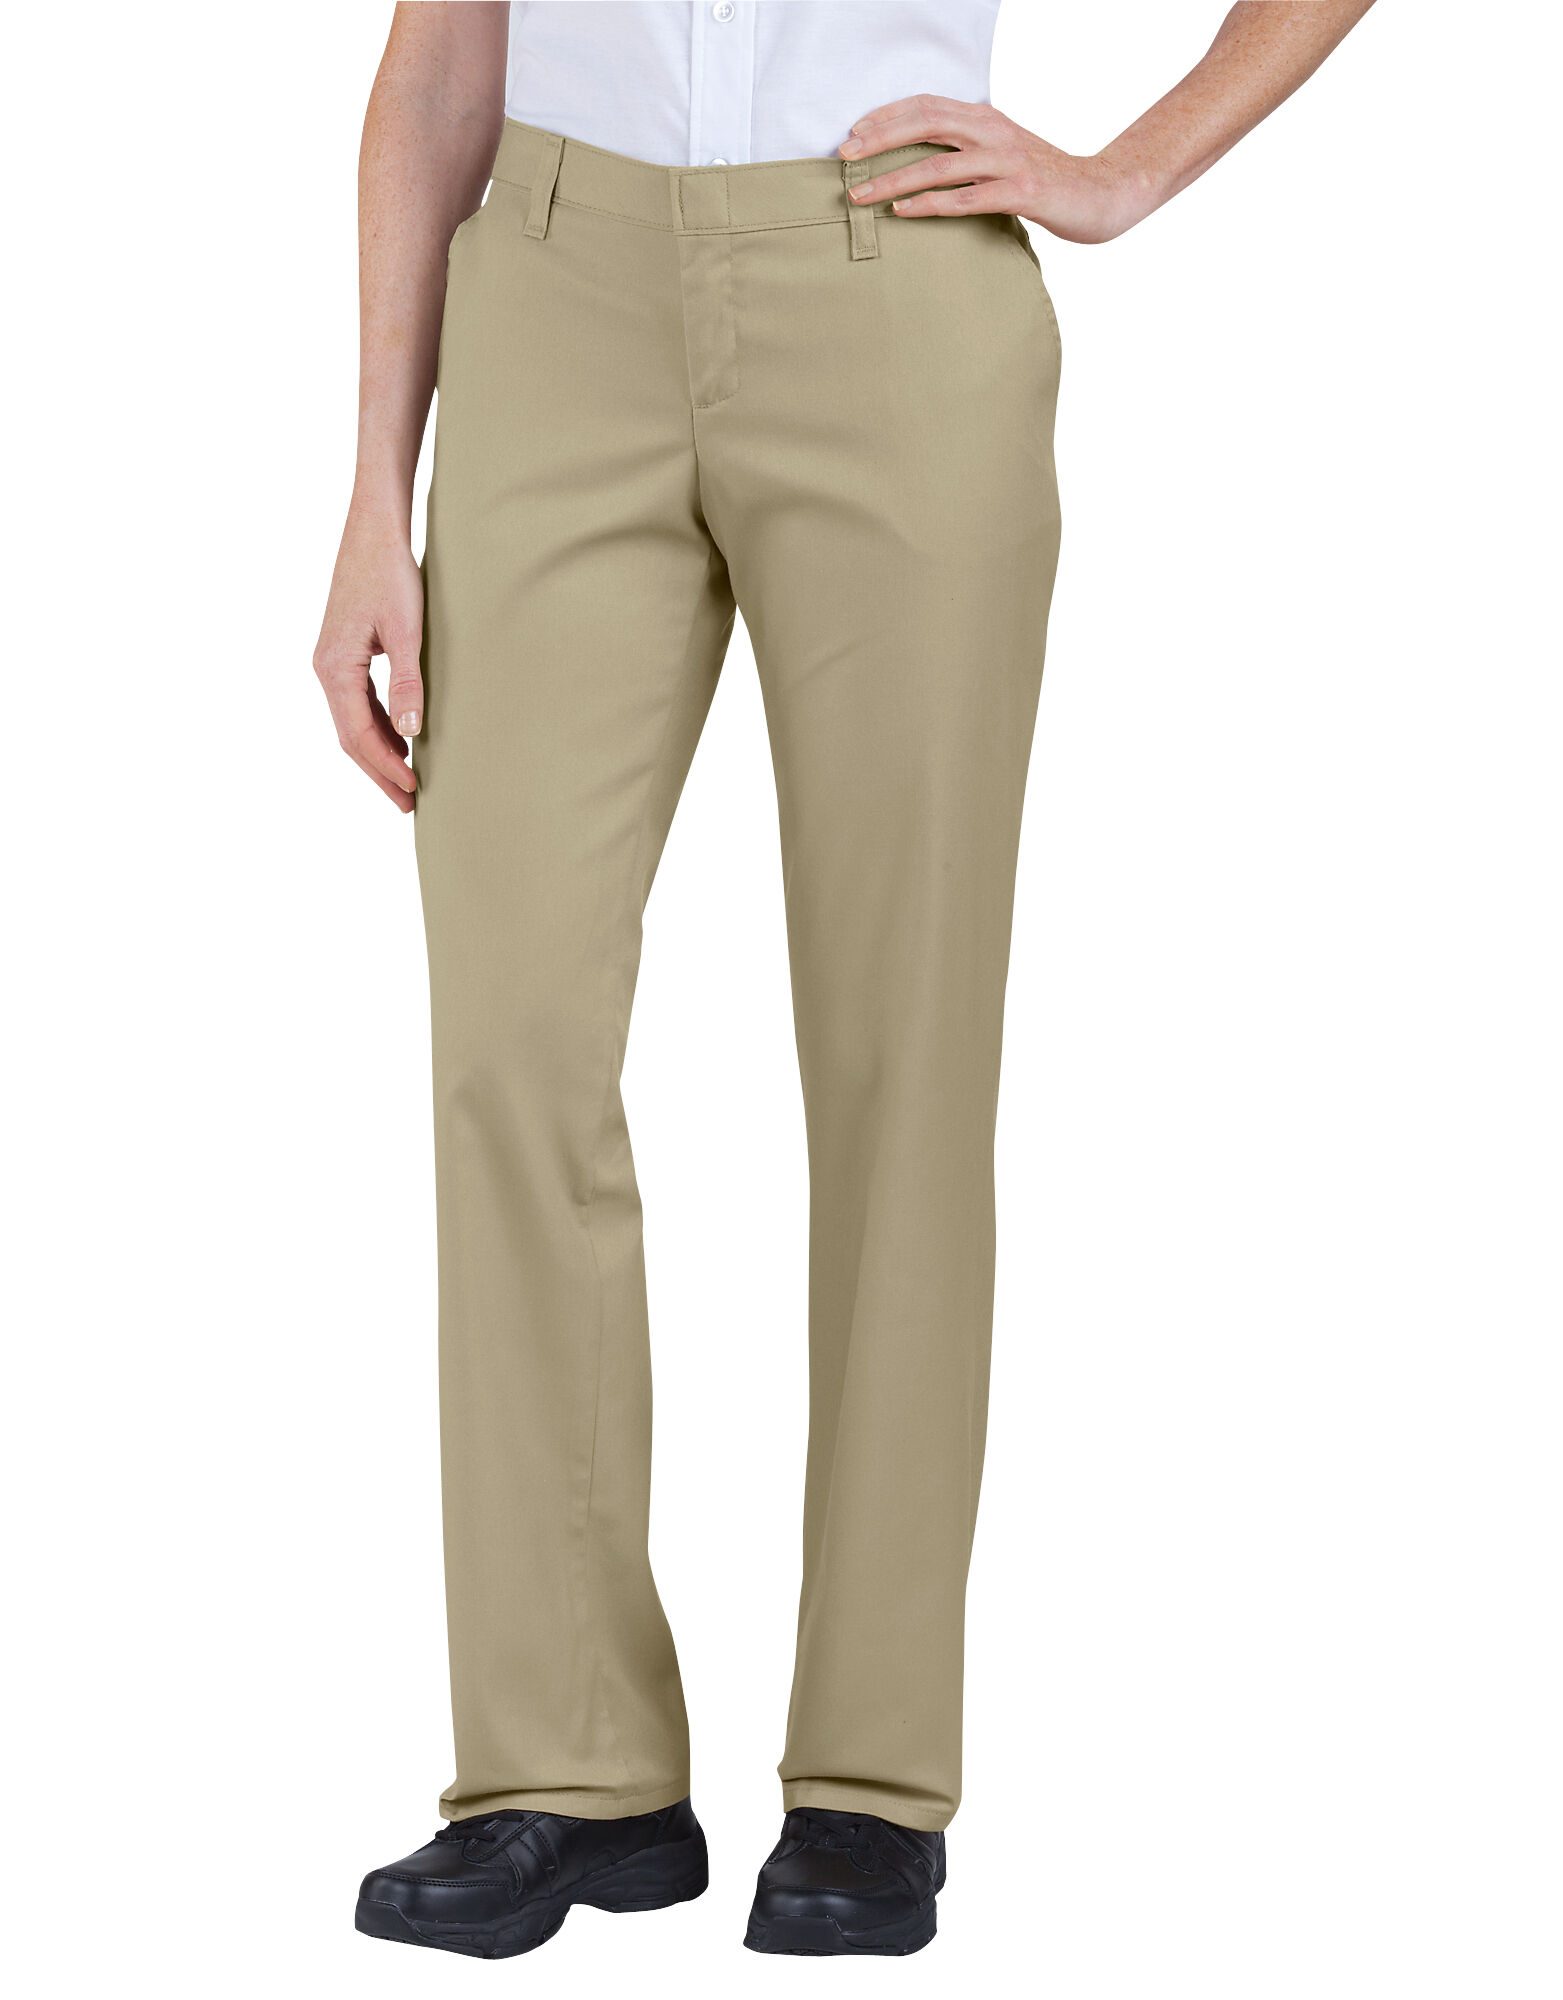 Women's Premium Relaxed Straight Flat Front Pant | Dickies